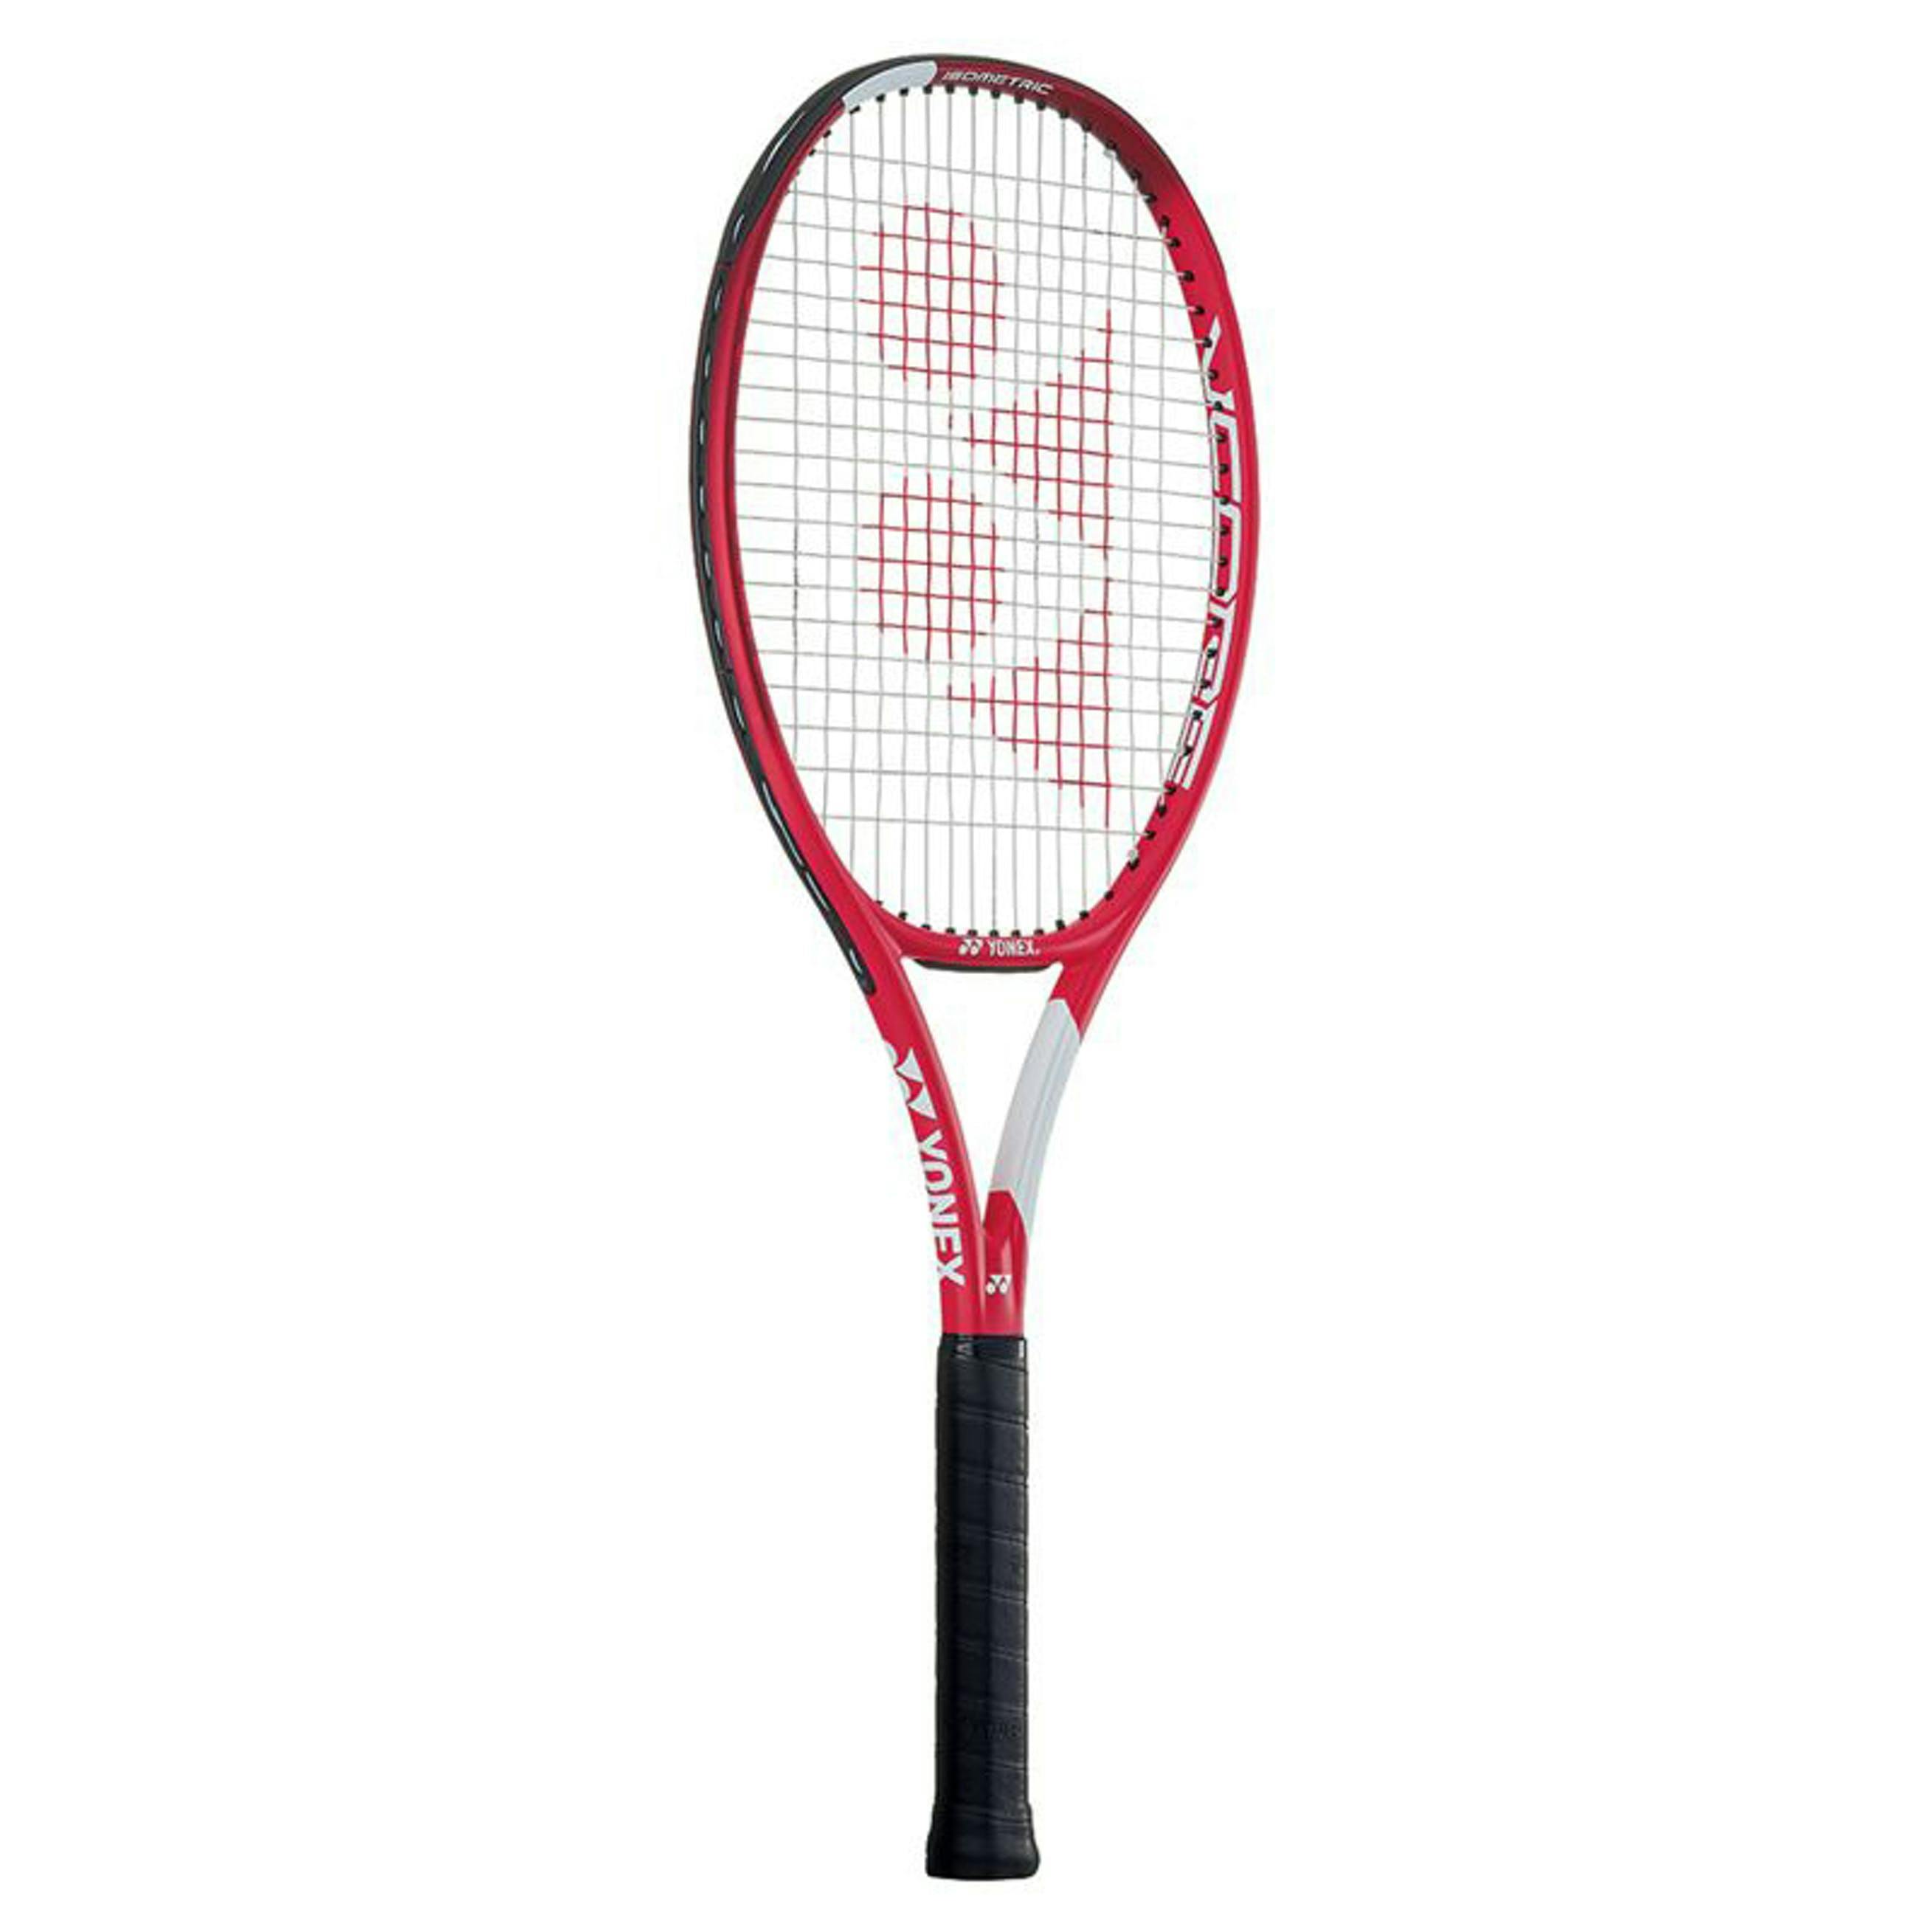 Product image of the Yonex VCore Ace.